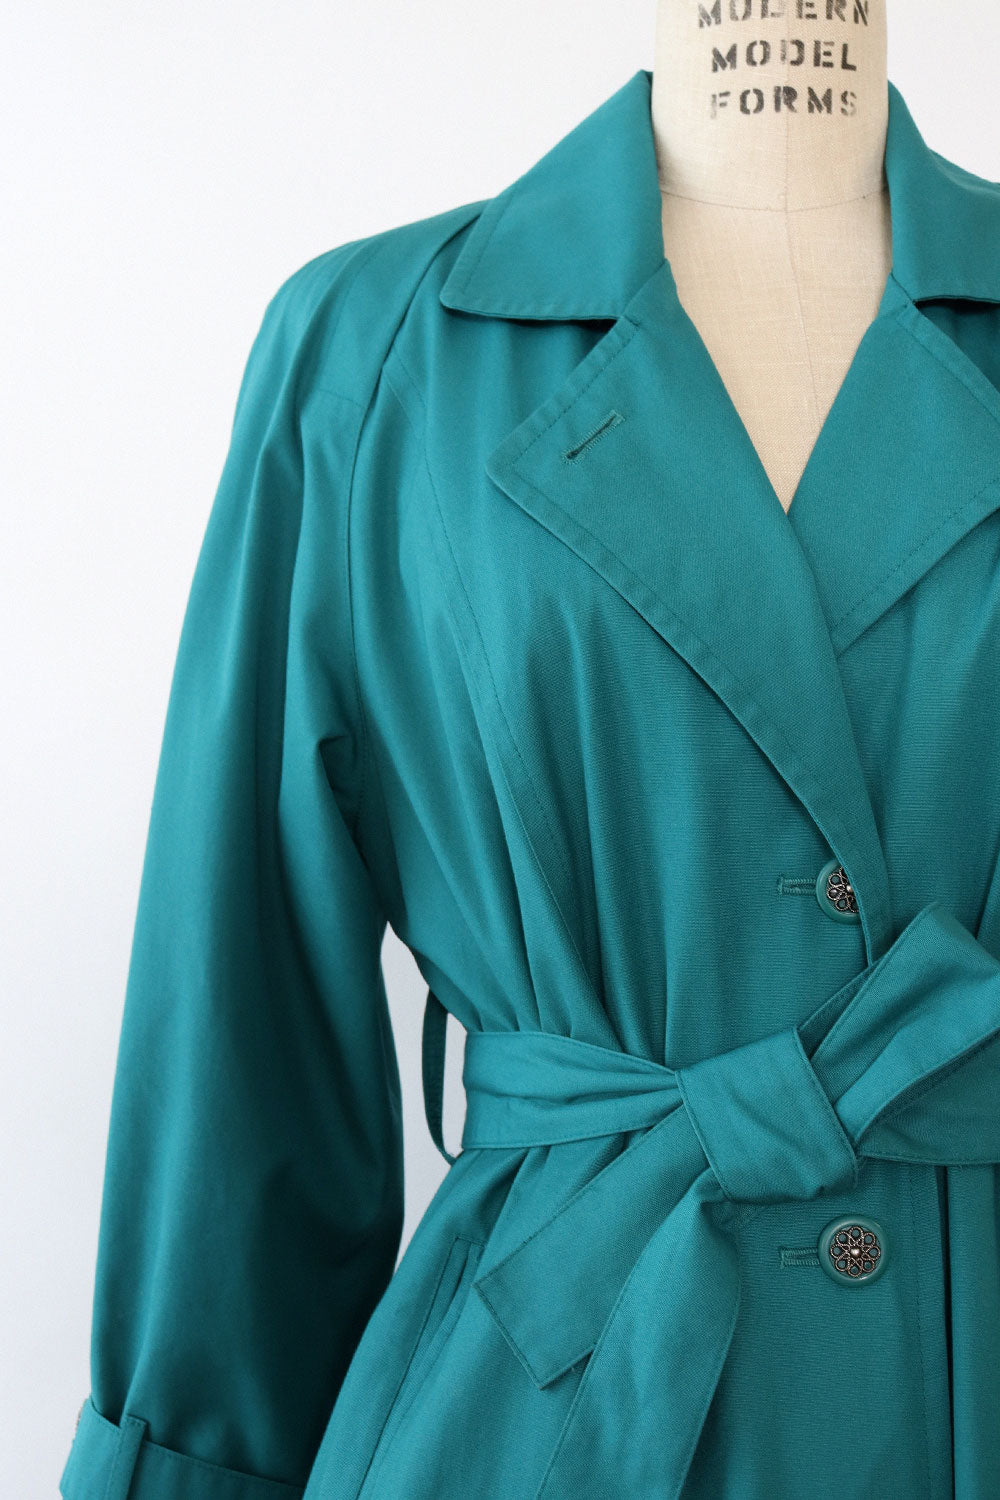 Teal London Fog Trench S/M